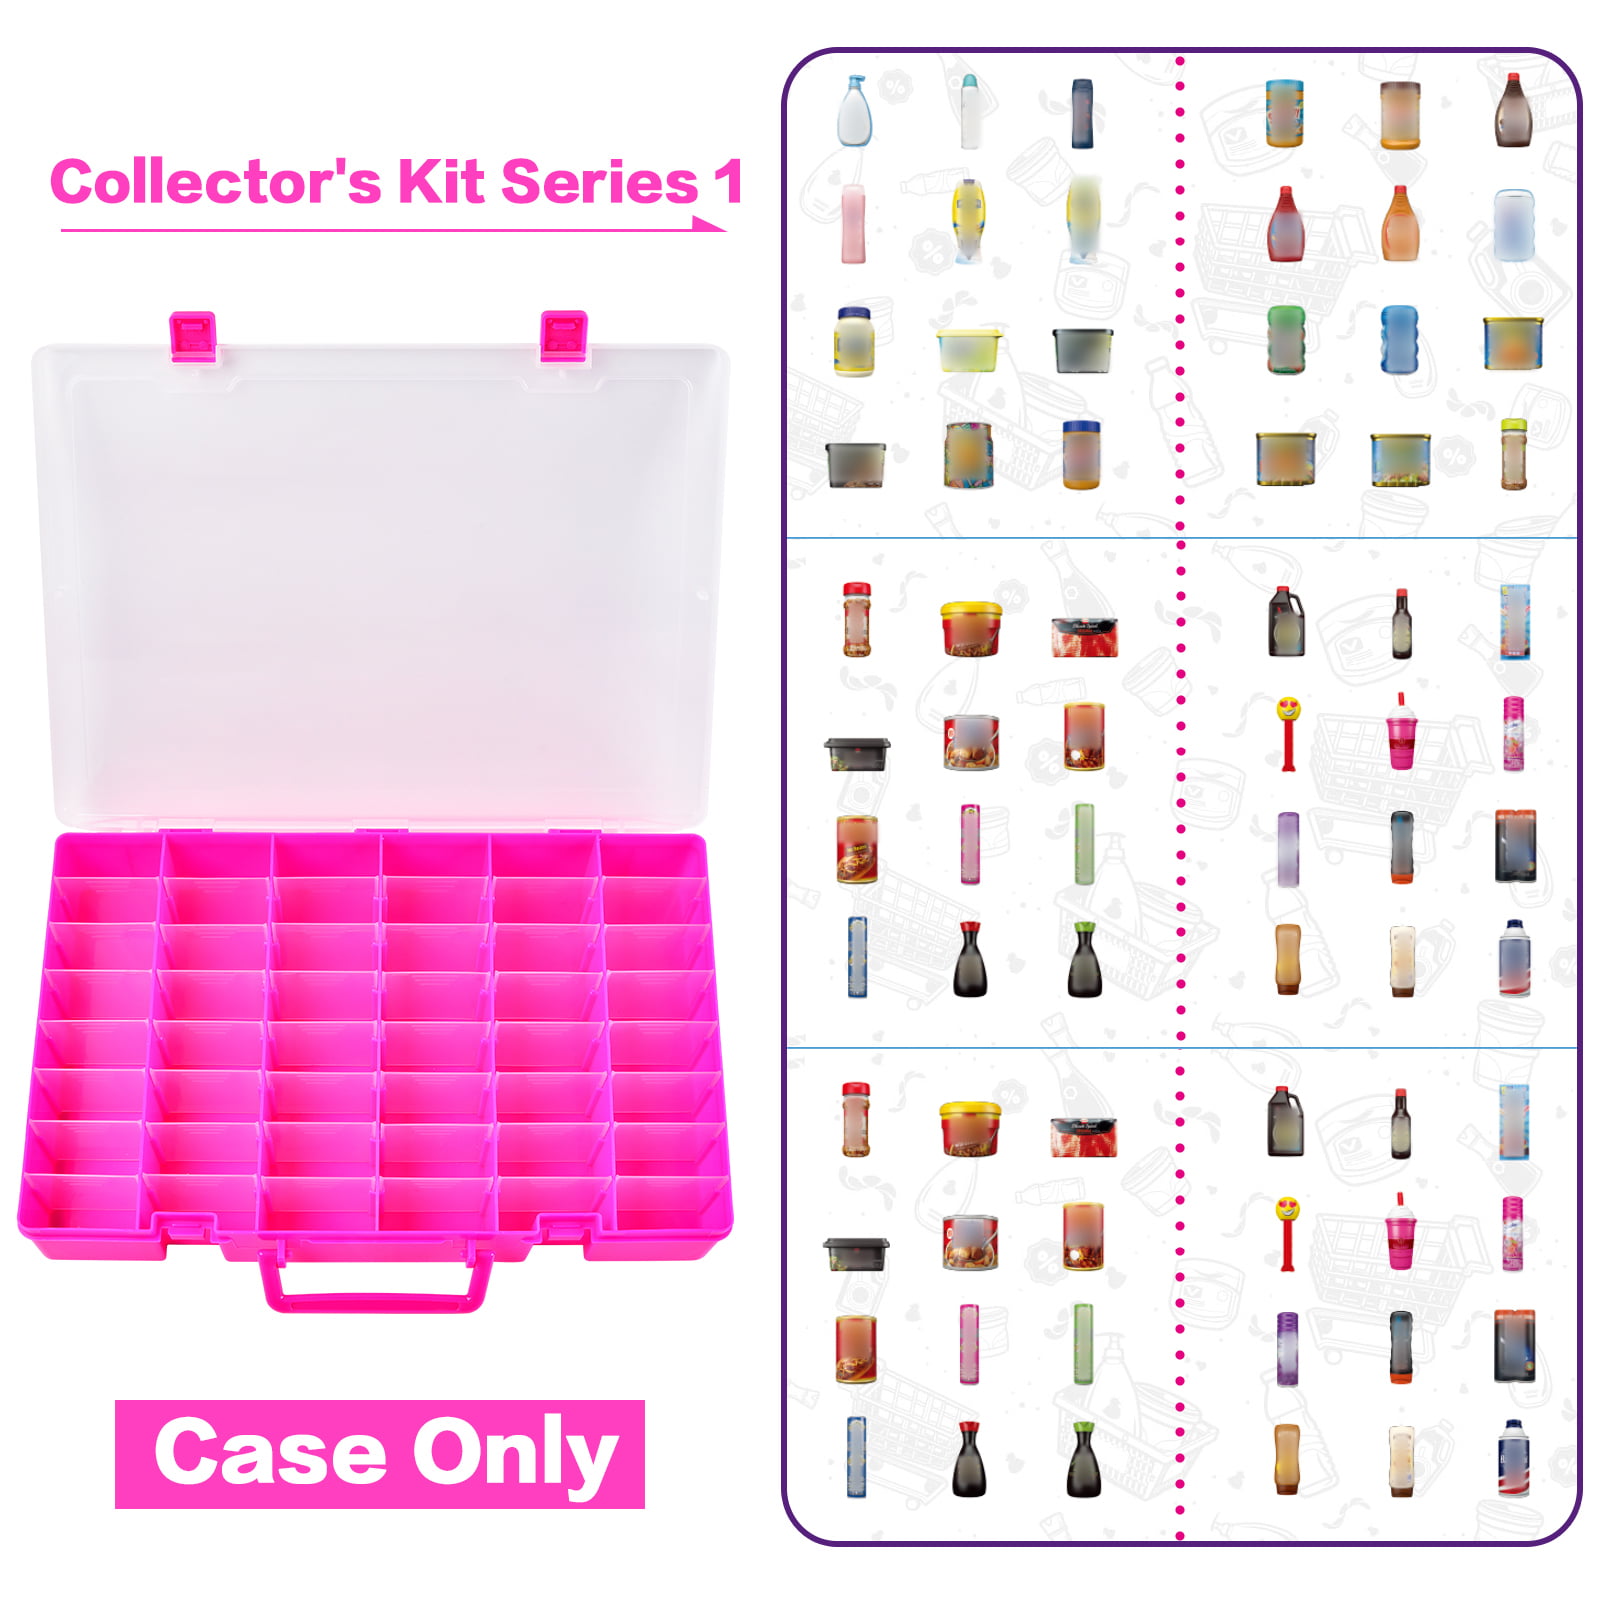 Case for Mini Brands Toys Series 1 2 3 Mystery Capsule Real Miniature  Collectible Kit, Storage Organizer Holder for Mini Mart Collection (Box  Only) 